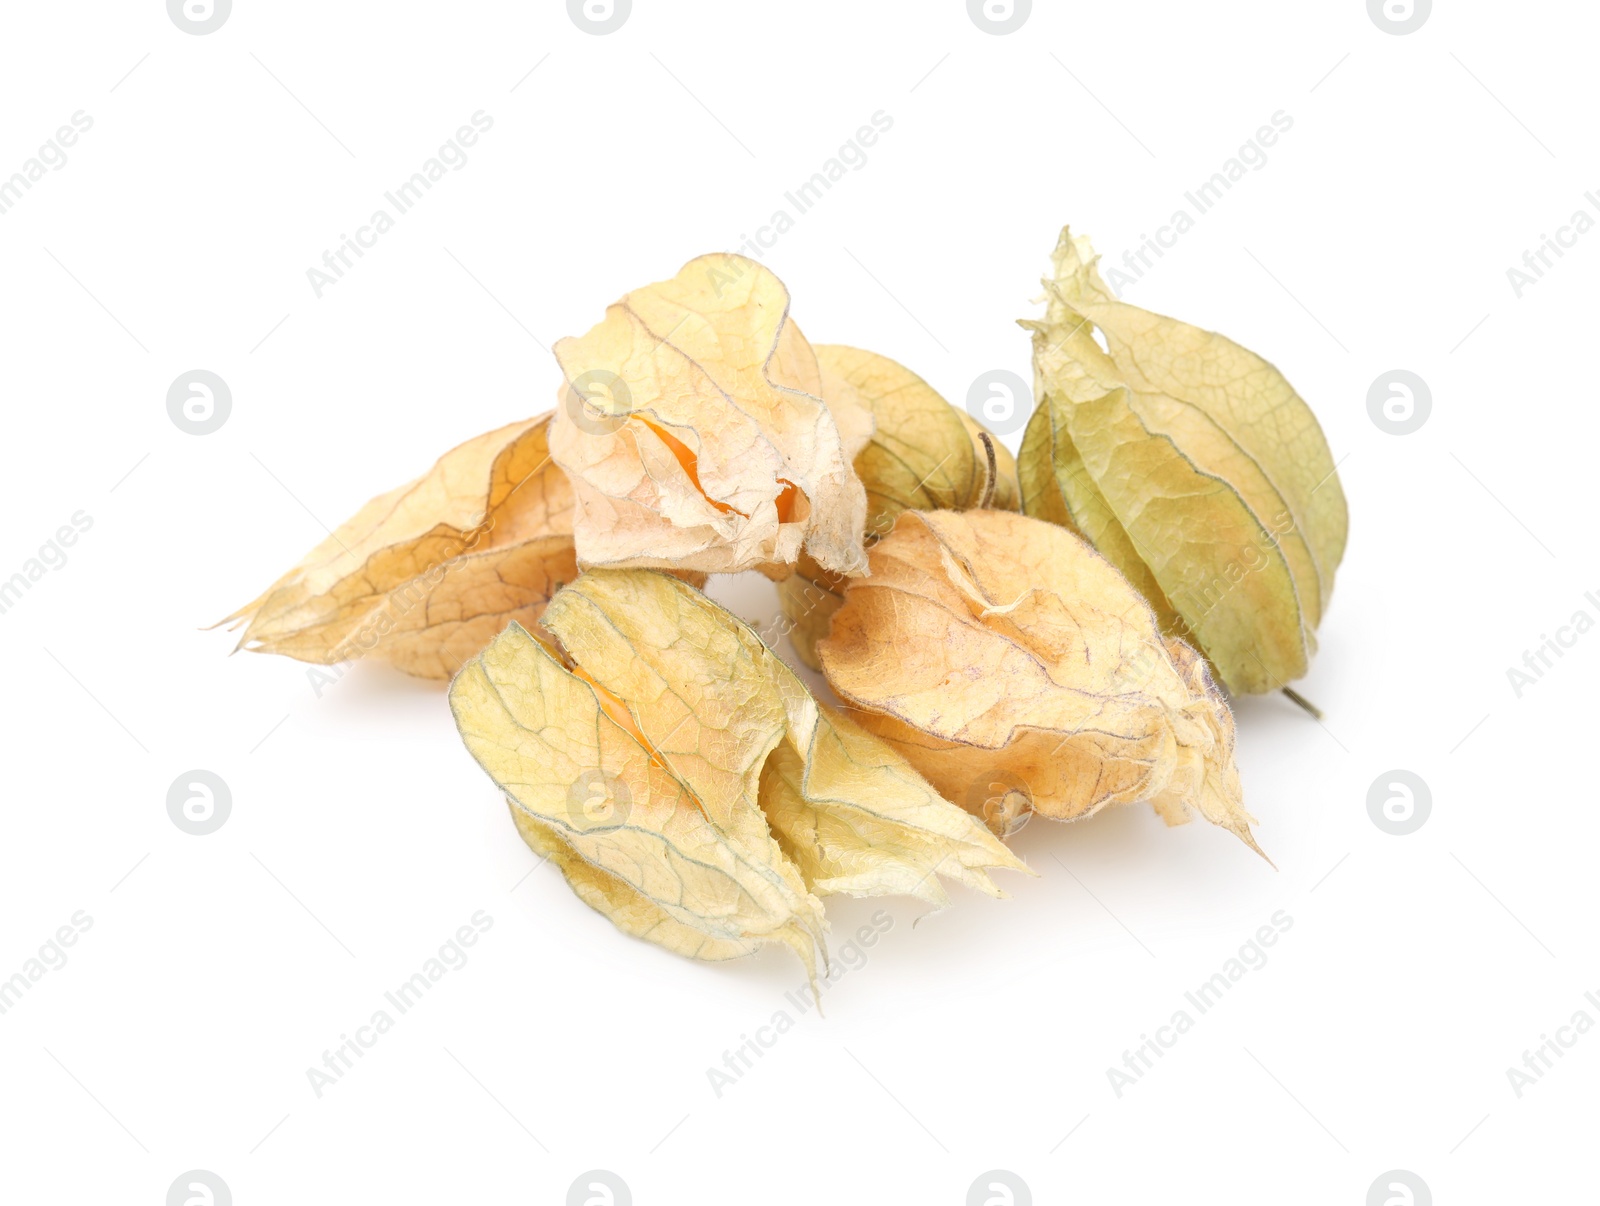 Photo of Many ripe physalis fruits with calyxes isolated on white